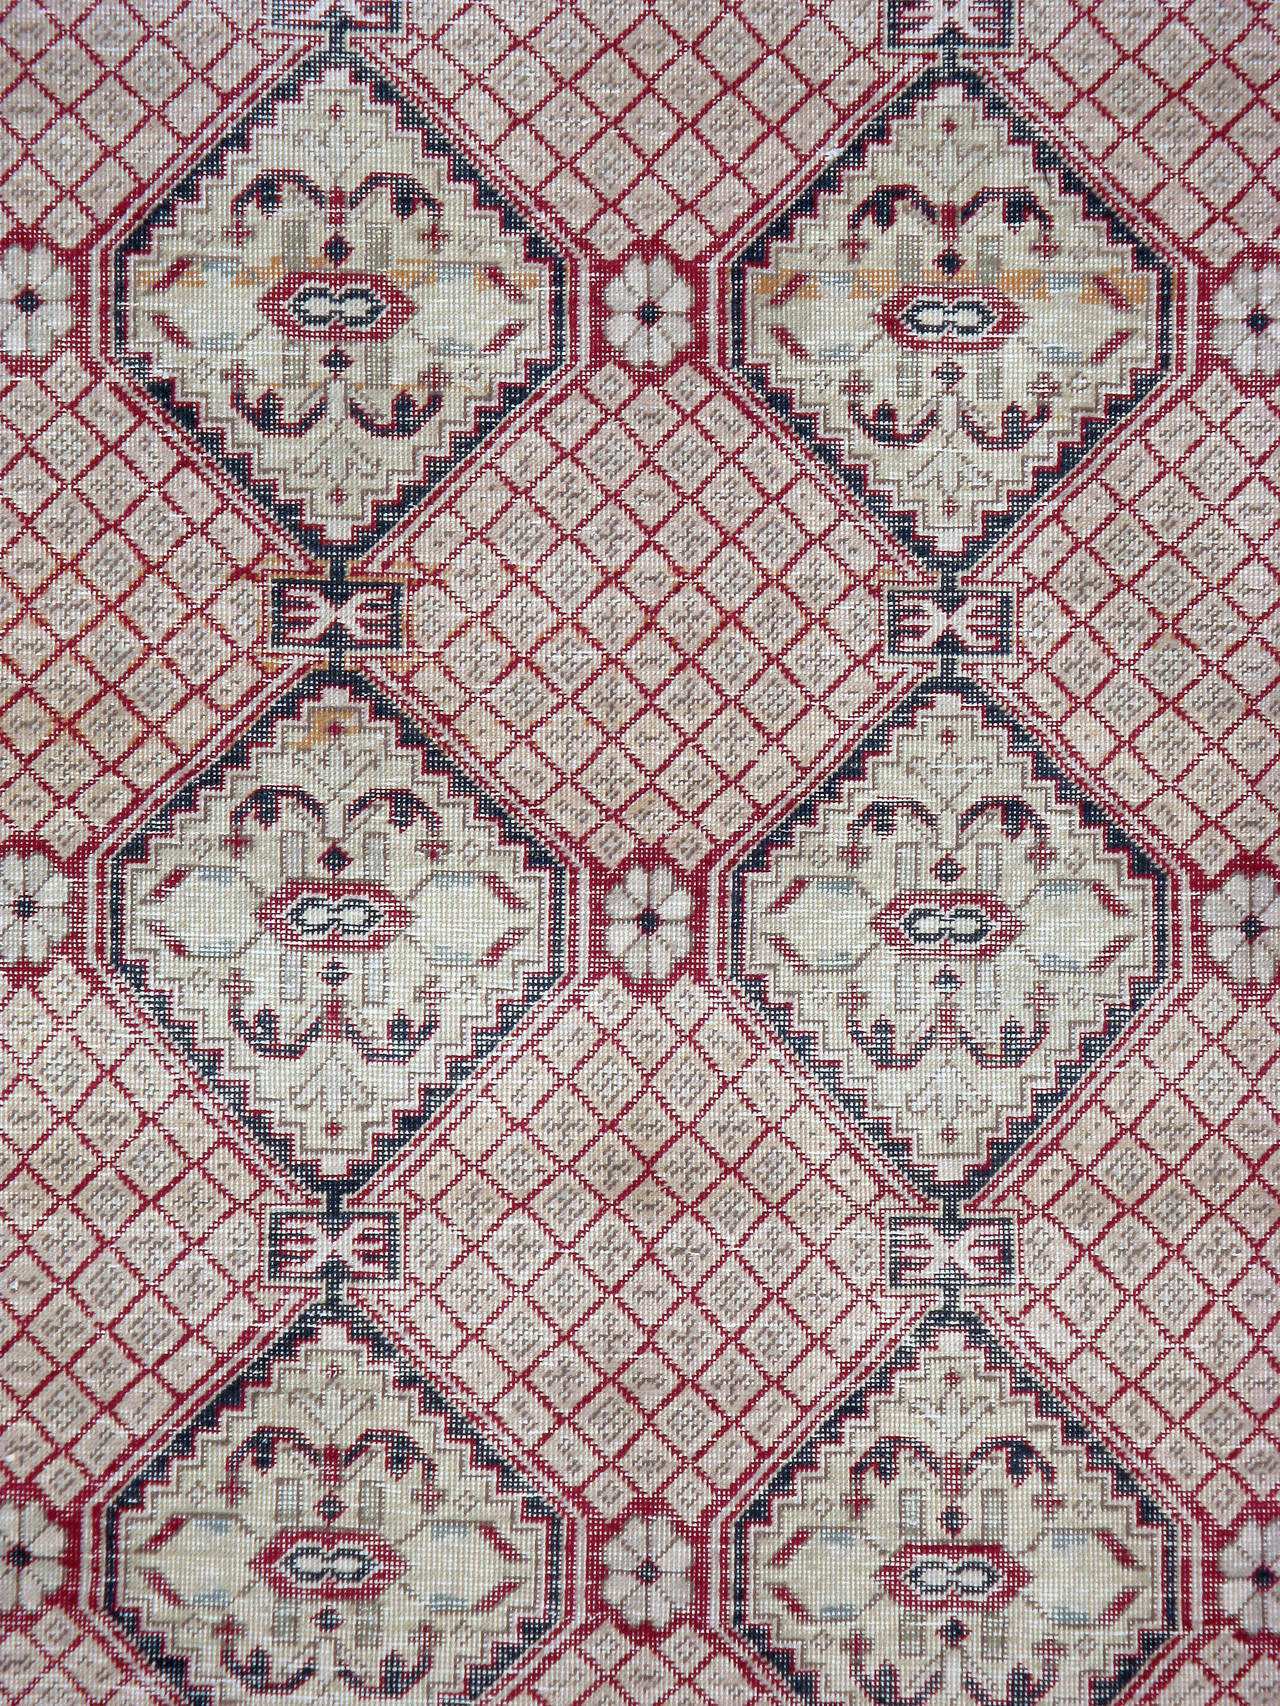 A vintage Turkish Sivas carpet from the second quarter of the 20th century.